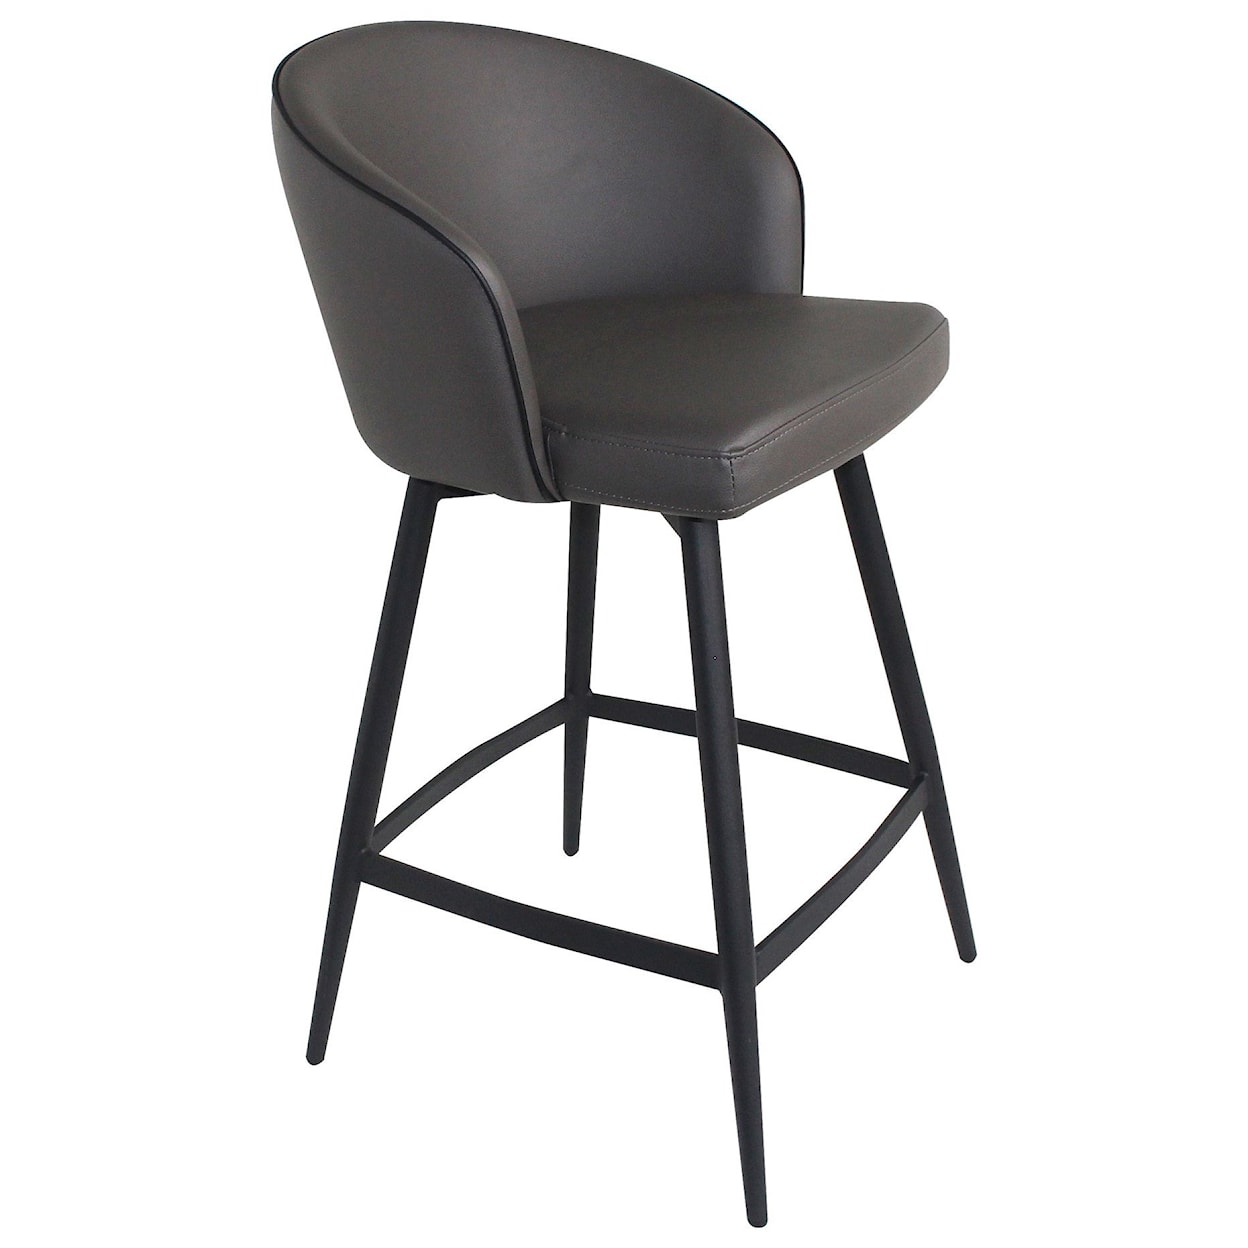 Moe's Home Collection Webber Charcoal Counter Stool